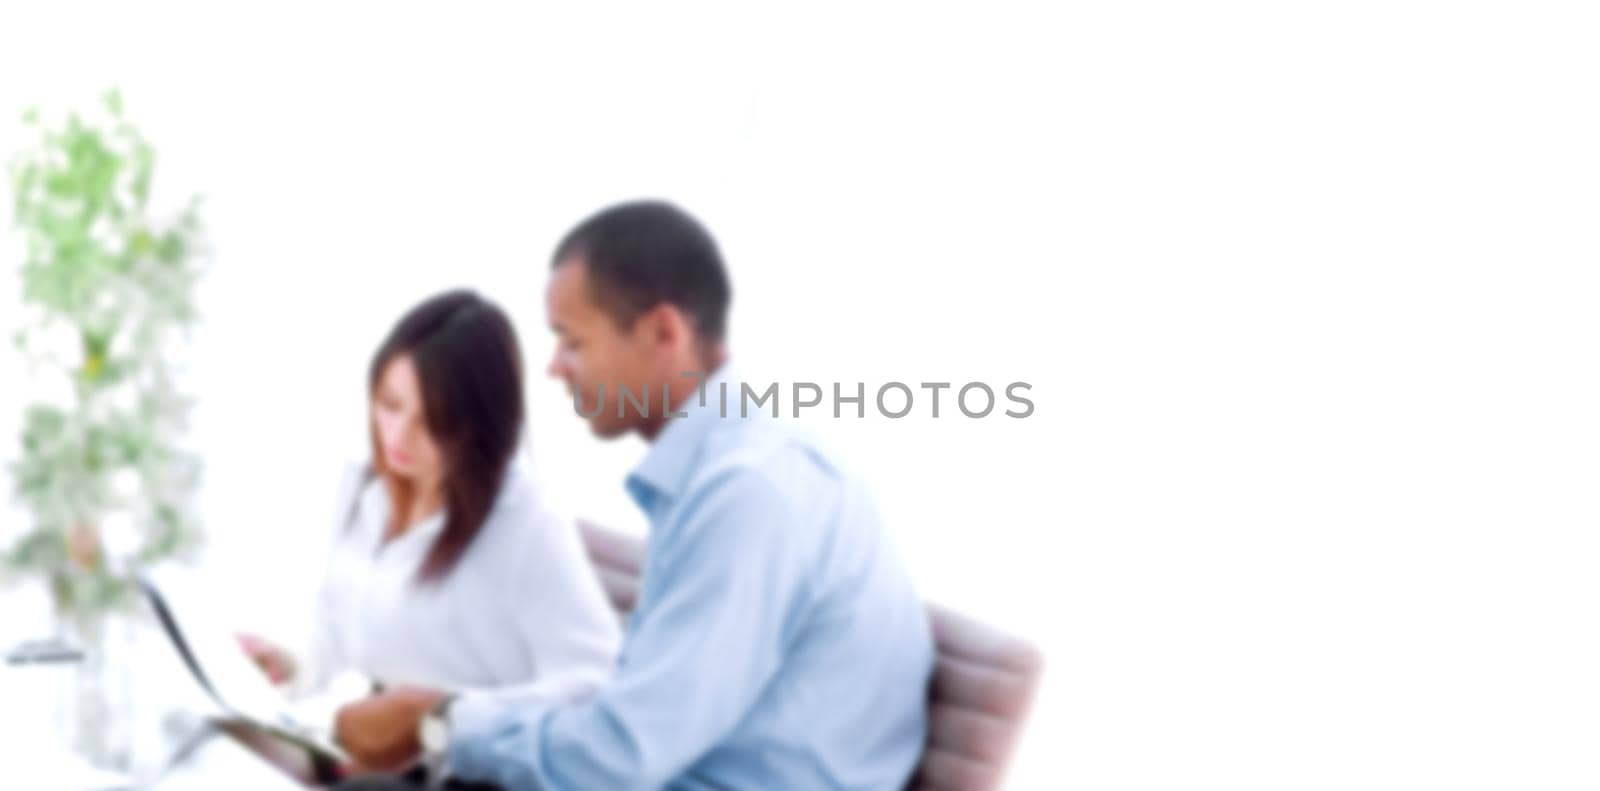 blurred image for the advertising text. photo with copy space. business colleagues discussing documents sitting at Desk by SmartPhotoLab